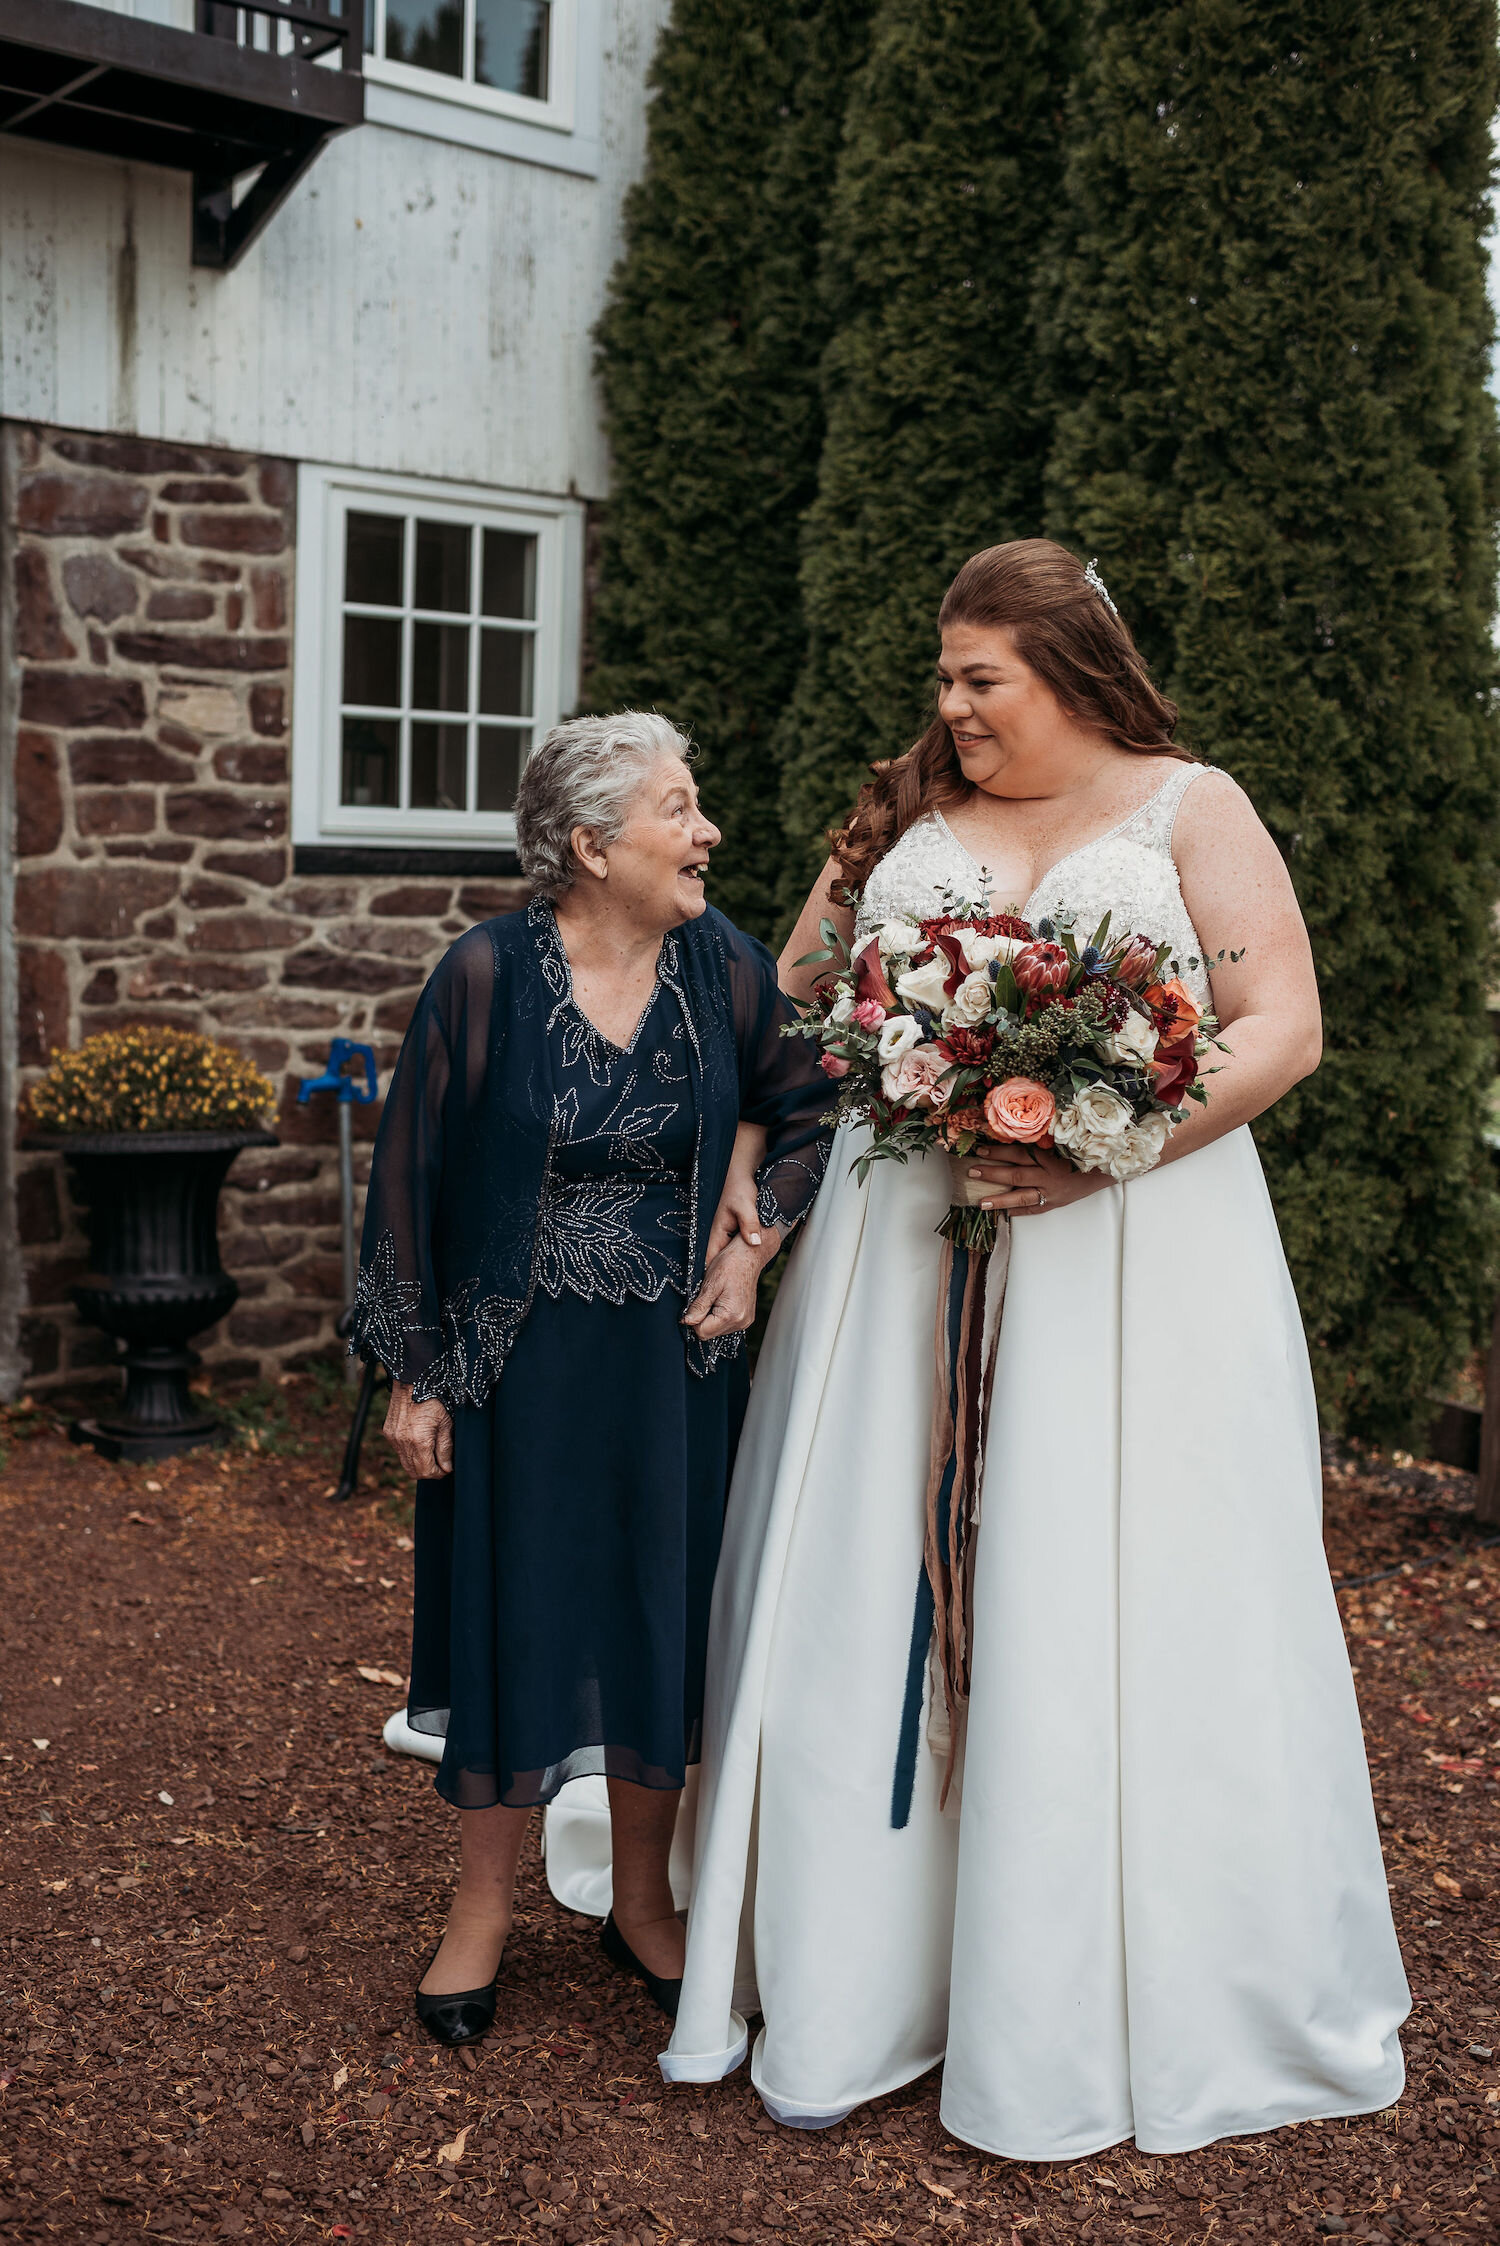 Bride with her grandmother at Durham Hill Farm in Pipersville PA.